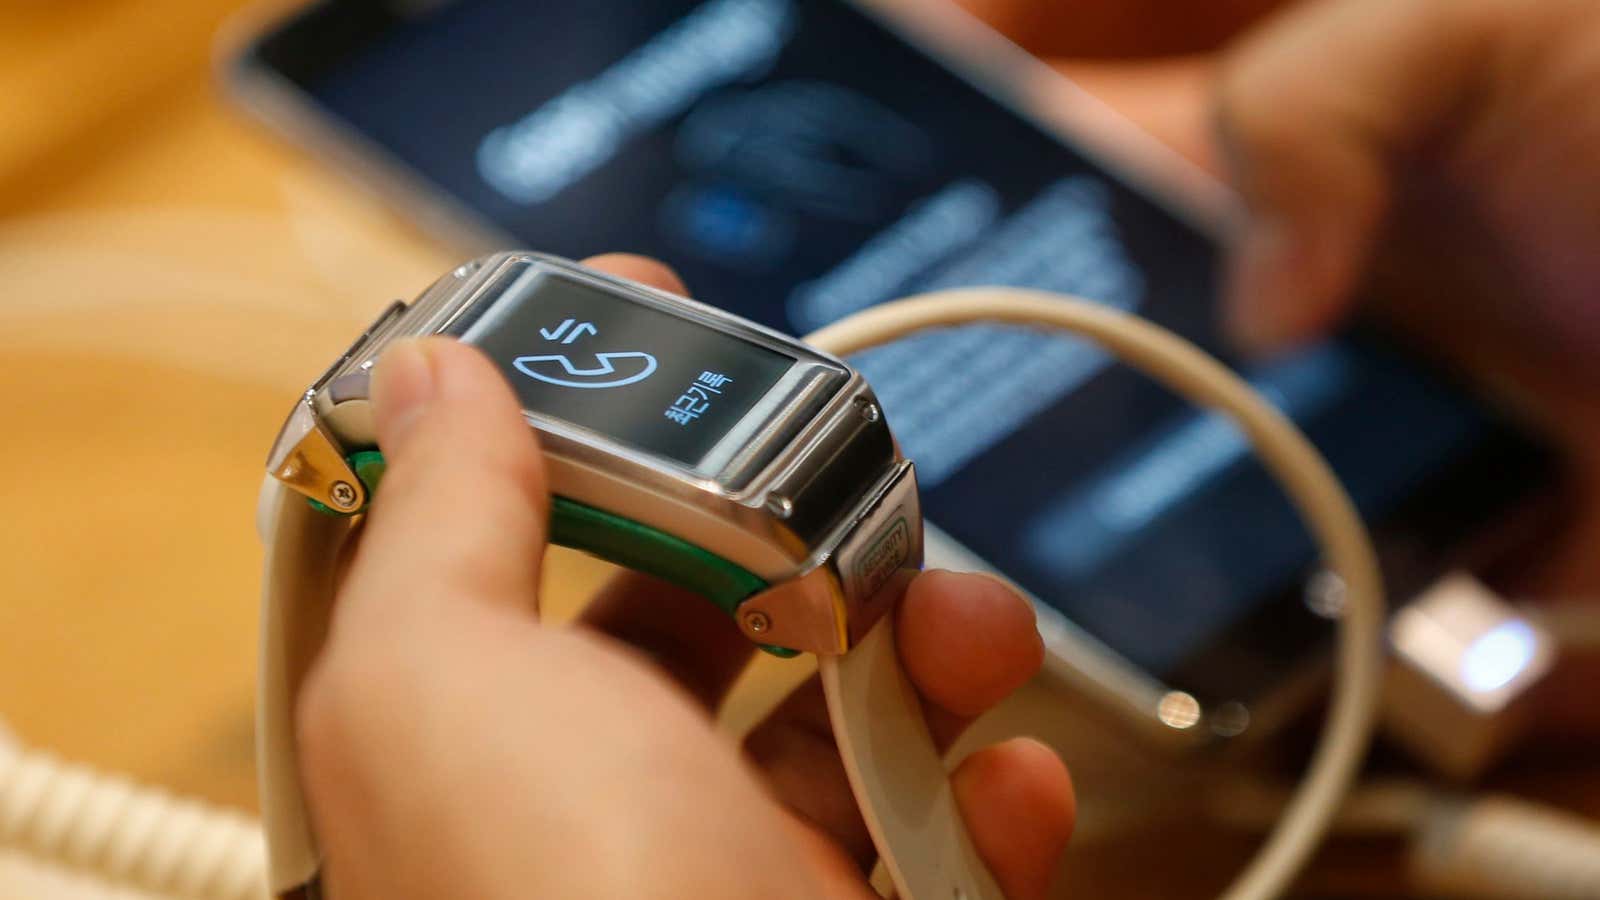 The Galaxy Gear beat Google to market, but hasn&#39;t beat battery life issues